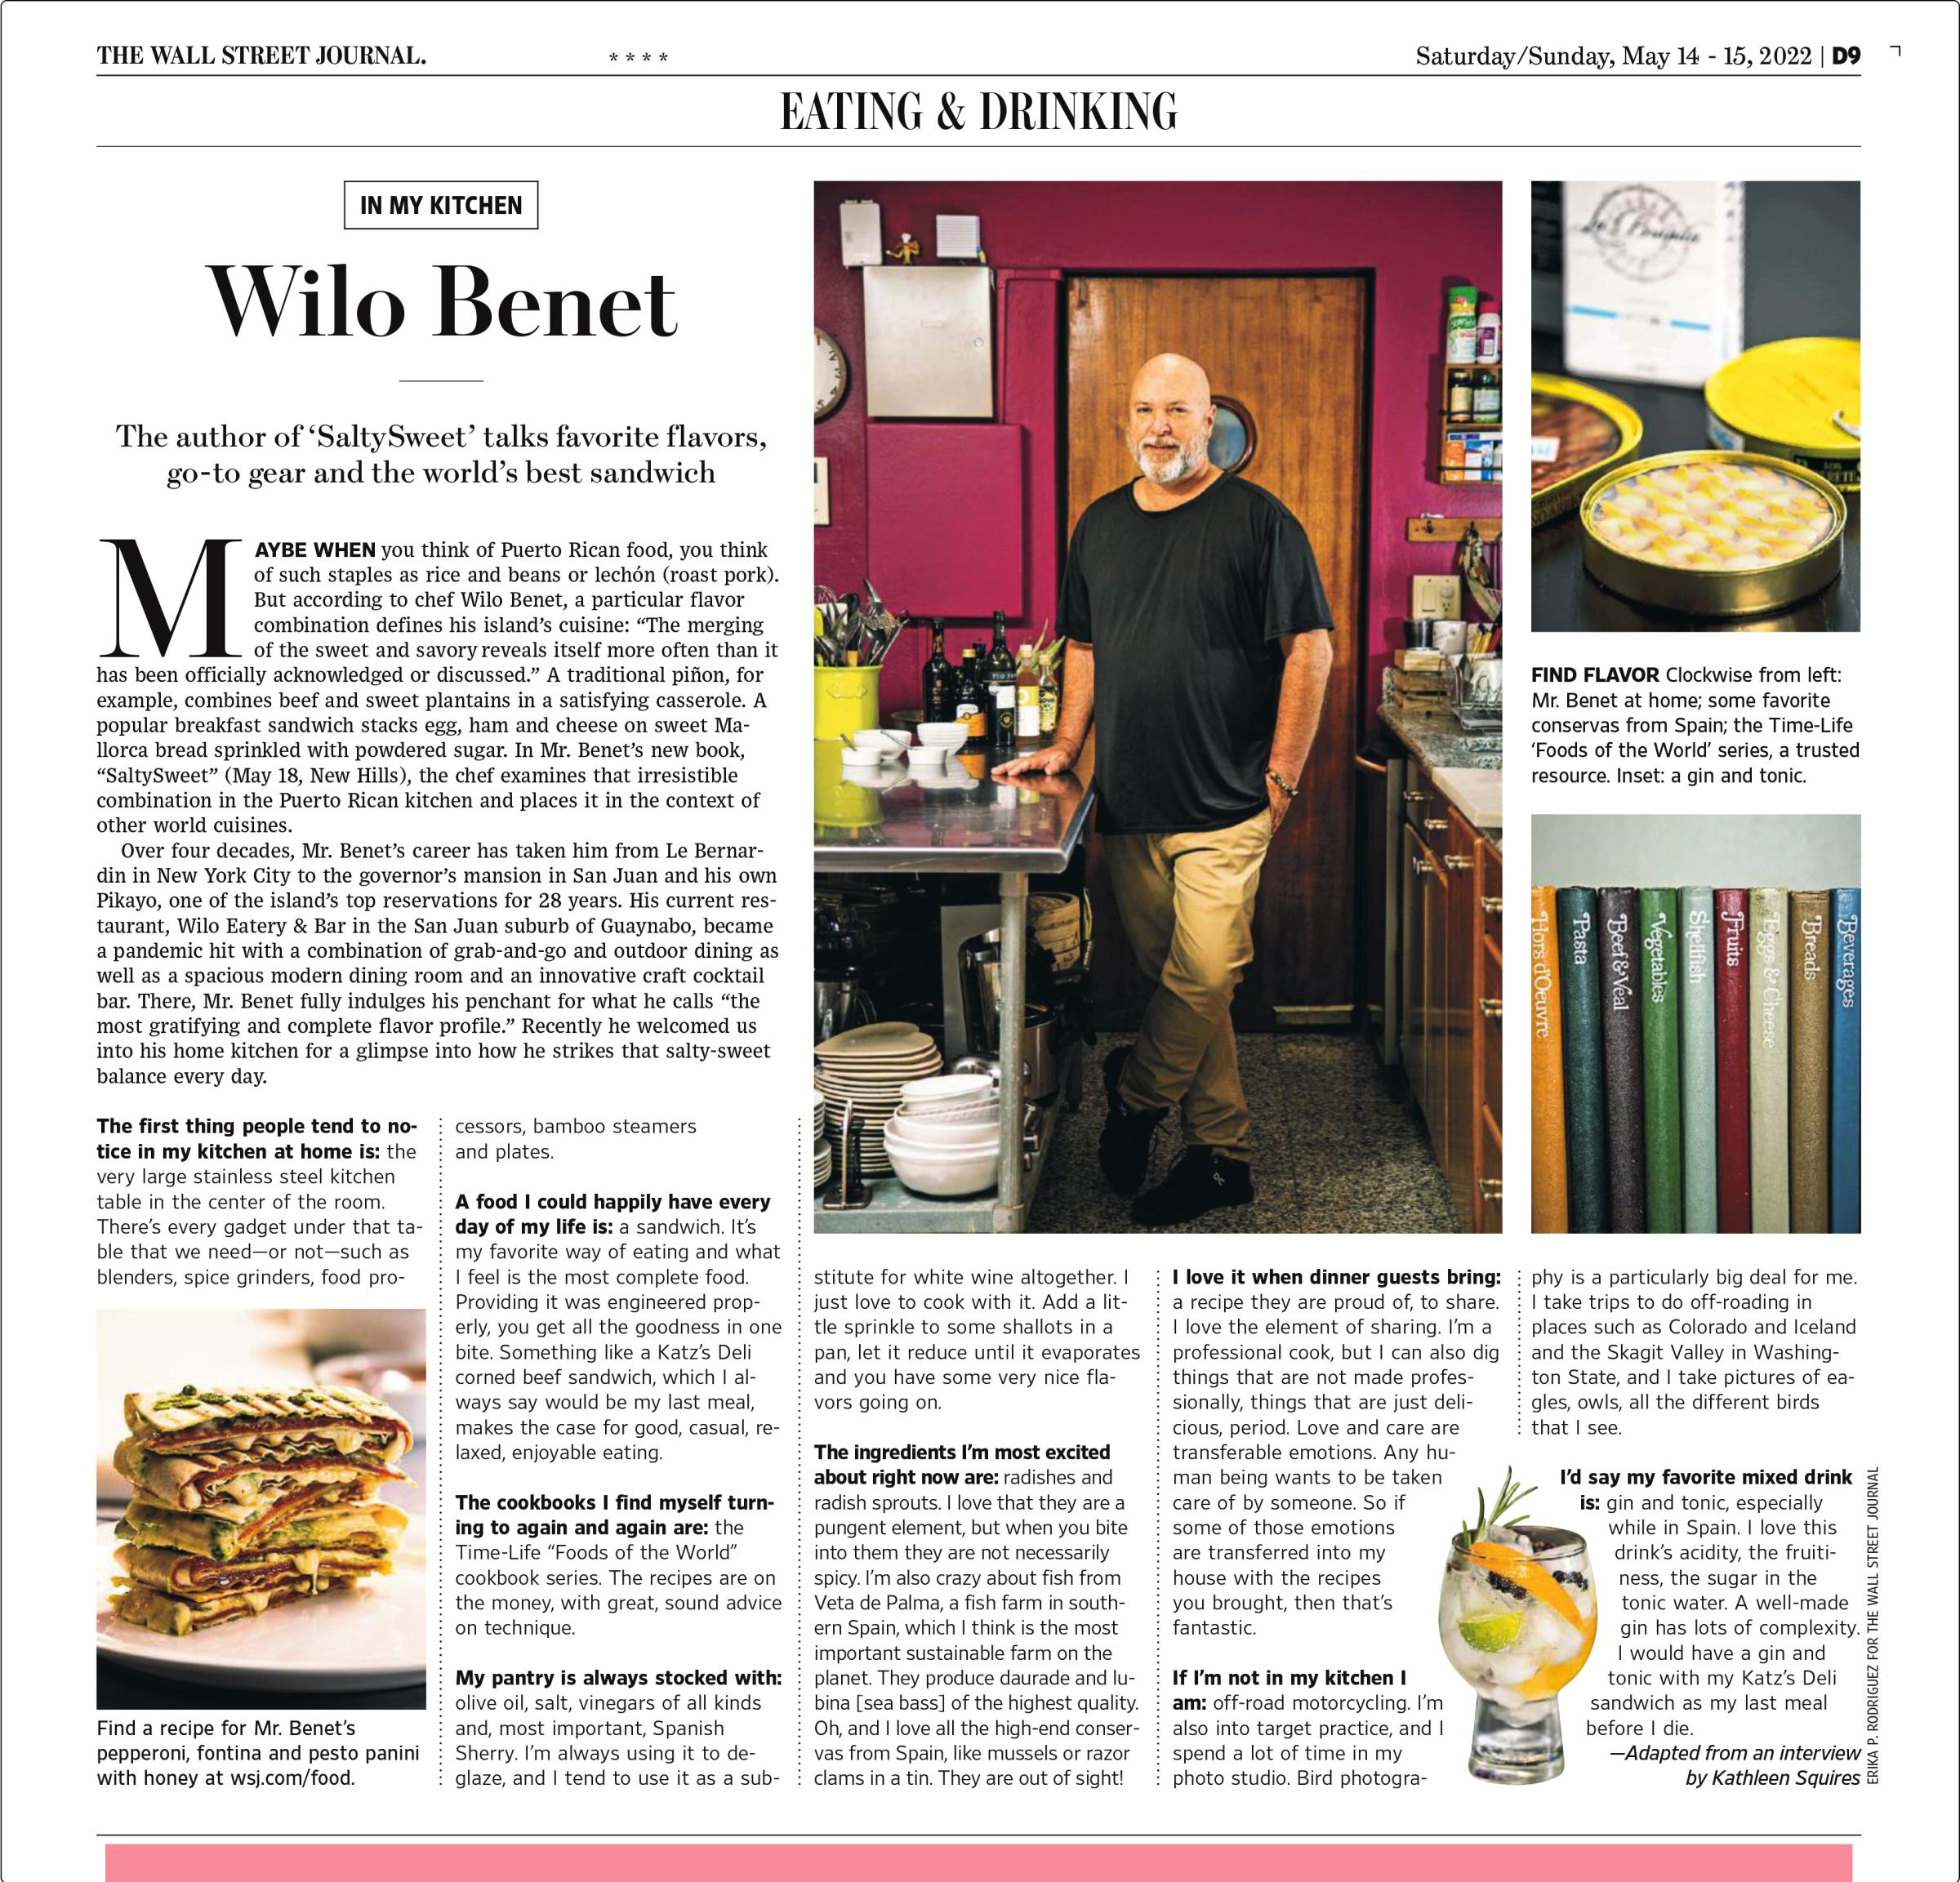 For The Wall Street Journal: Chef Wilo Benet 